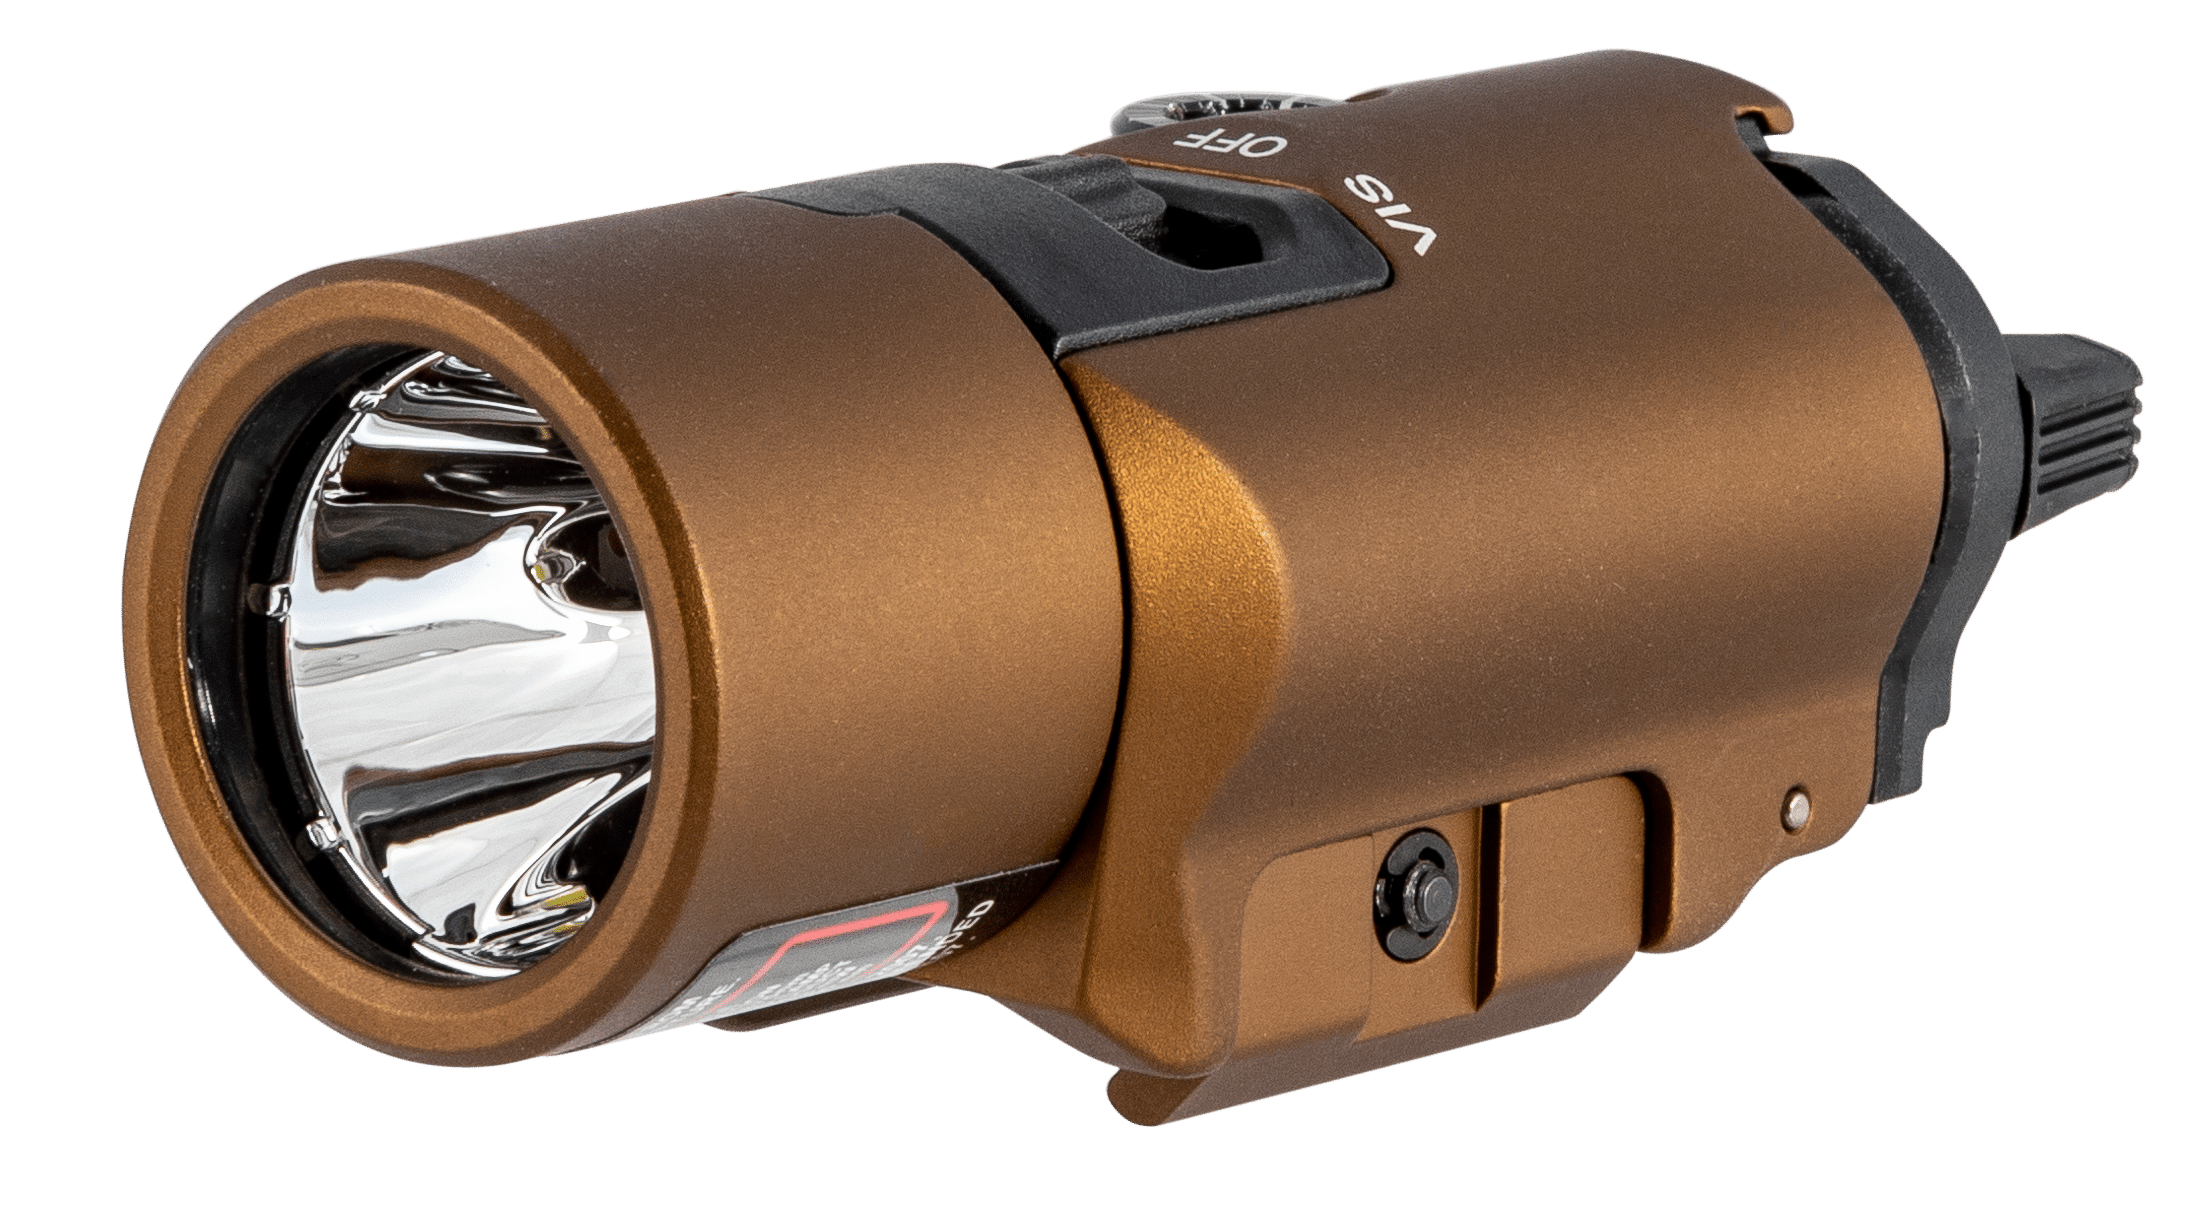 https://cityarsenal.com/product/streamlight-tlr-vir-ii-weapon-light-and-laser-ir-led-light-red-laser-coyote-69191/